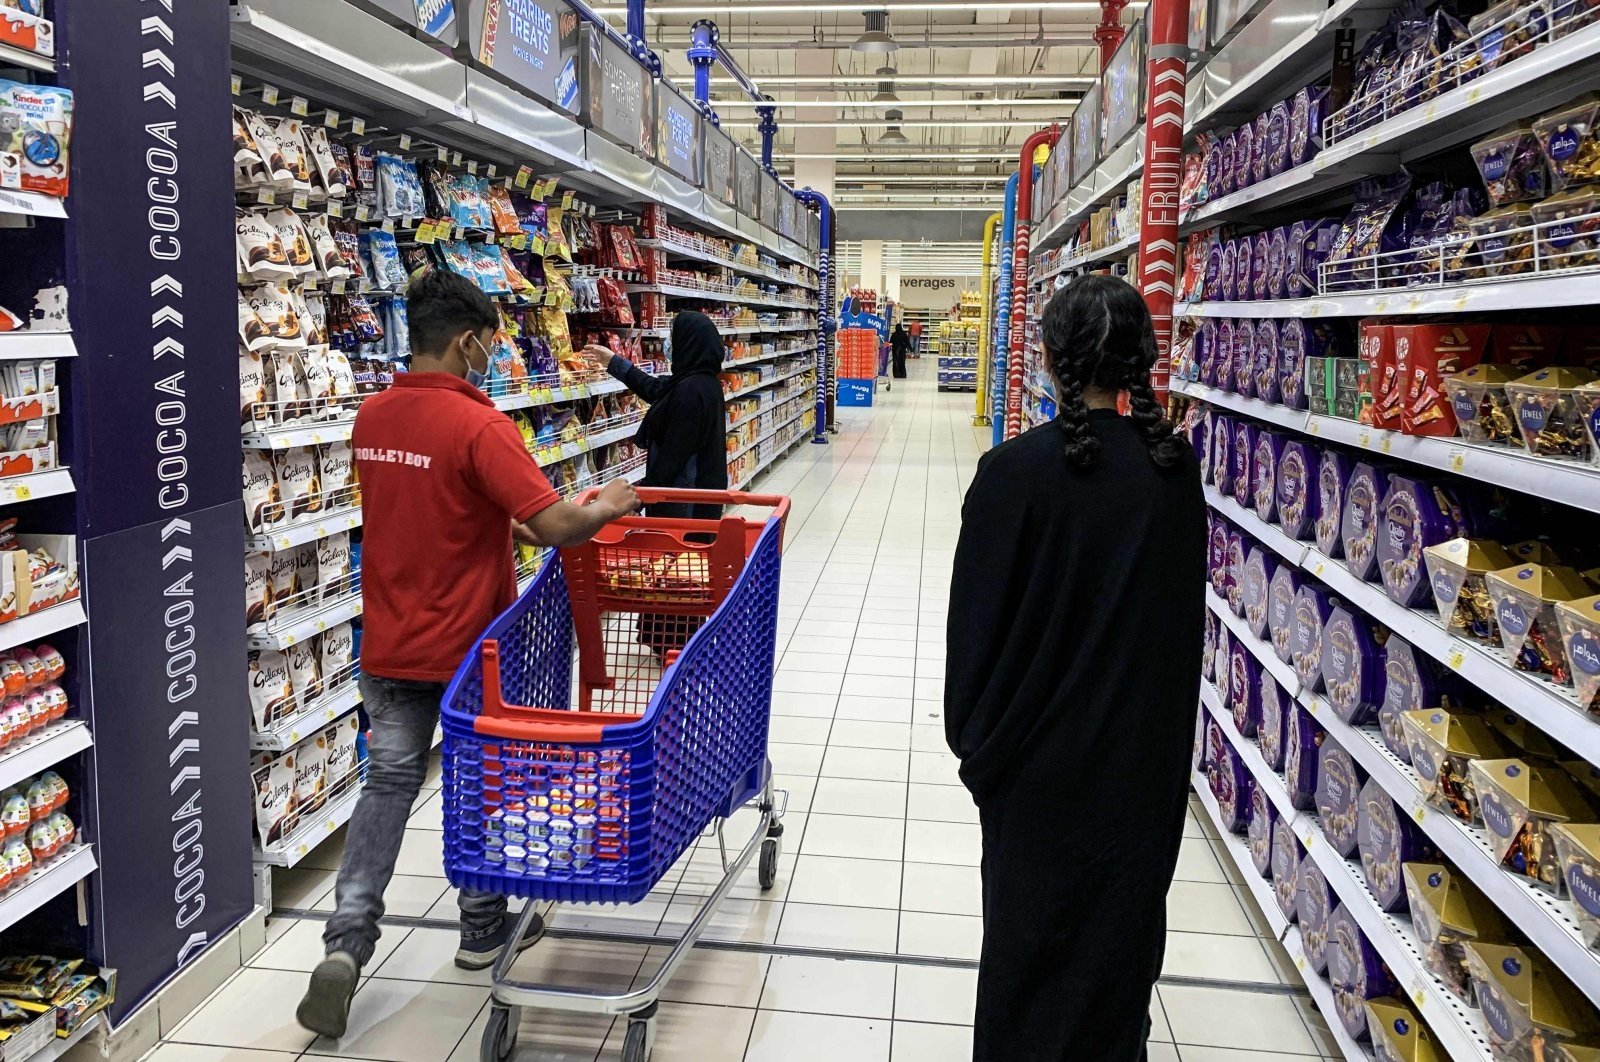 A woman shops for snacks at a supermarket in the capital Riyadh, Saudi Arabia, Oct. 18, 2020. (AFP Photo)